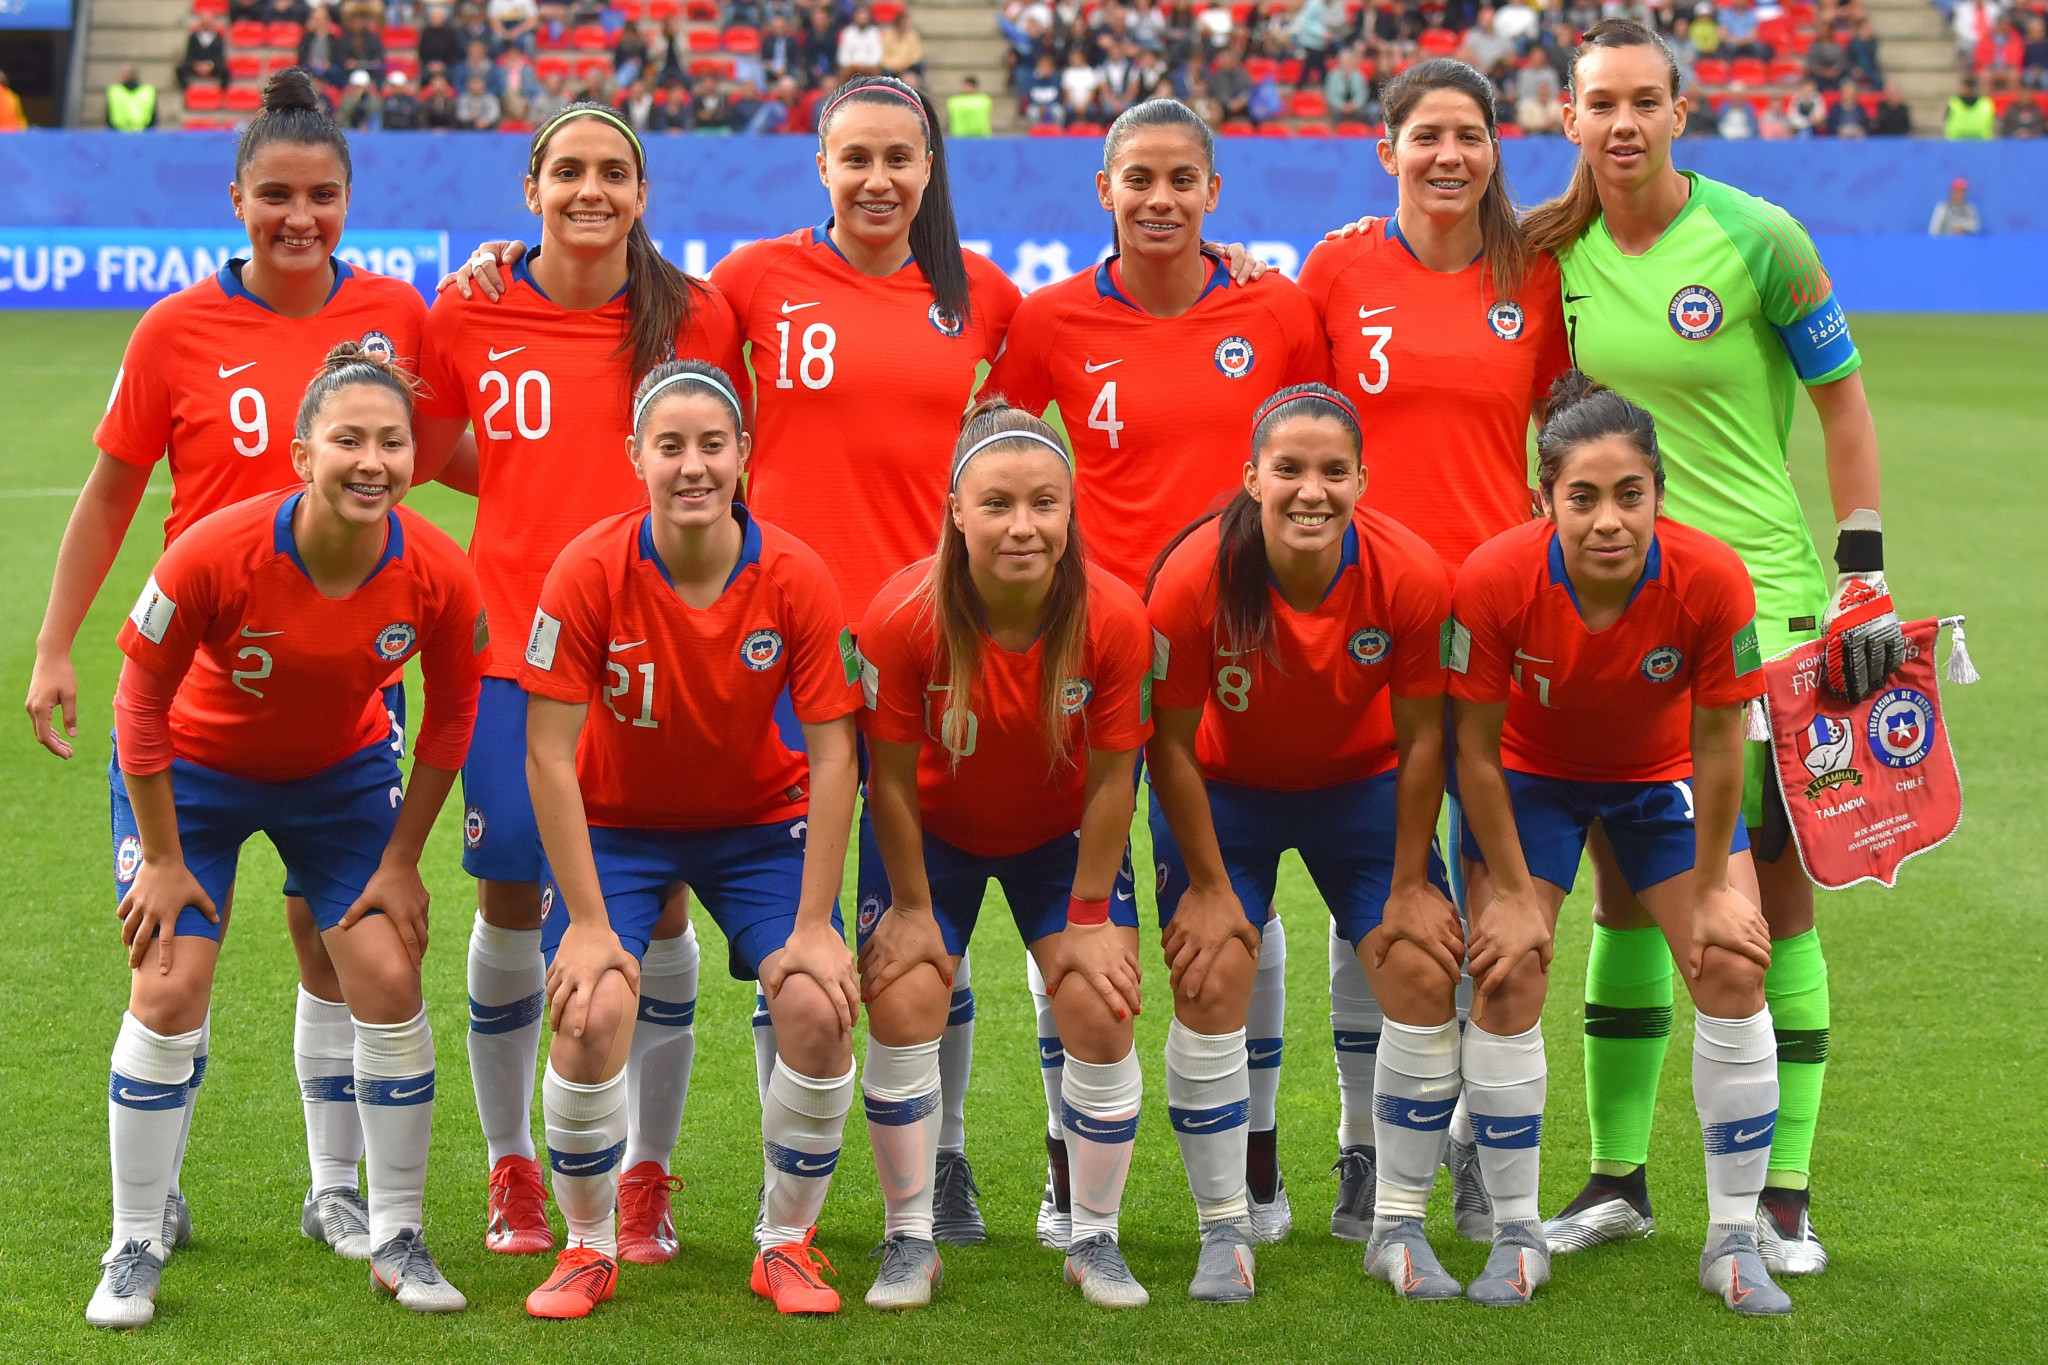 Chile beat Cameroon to earn last women's football berth at Tokyo 2020